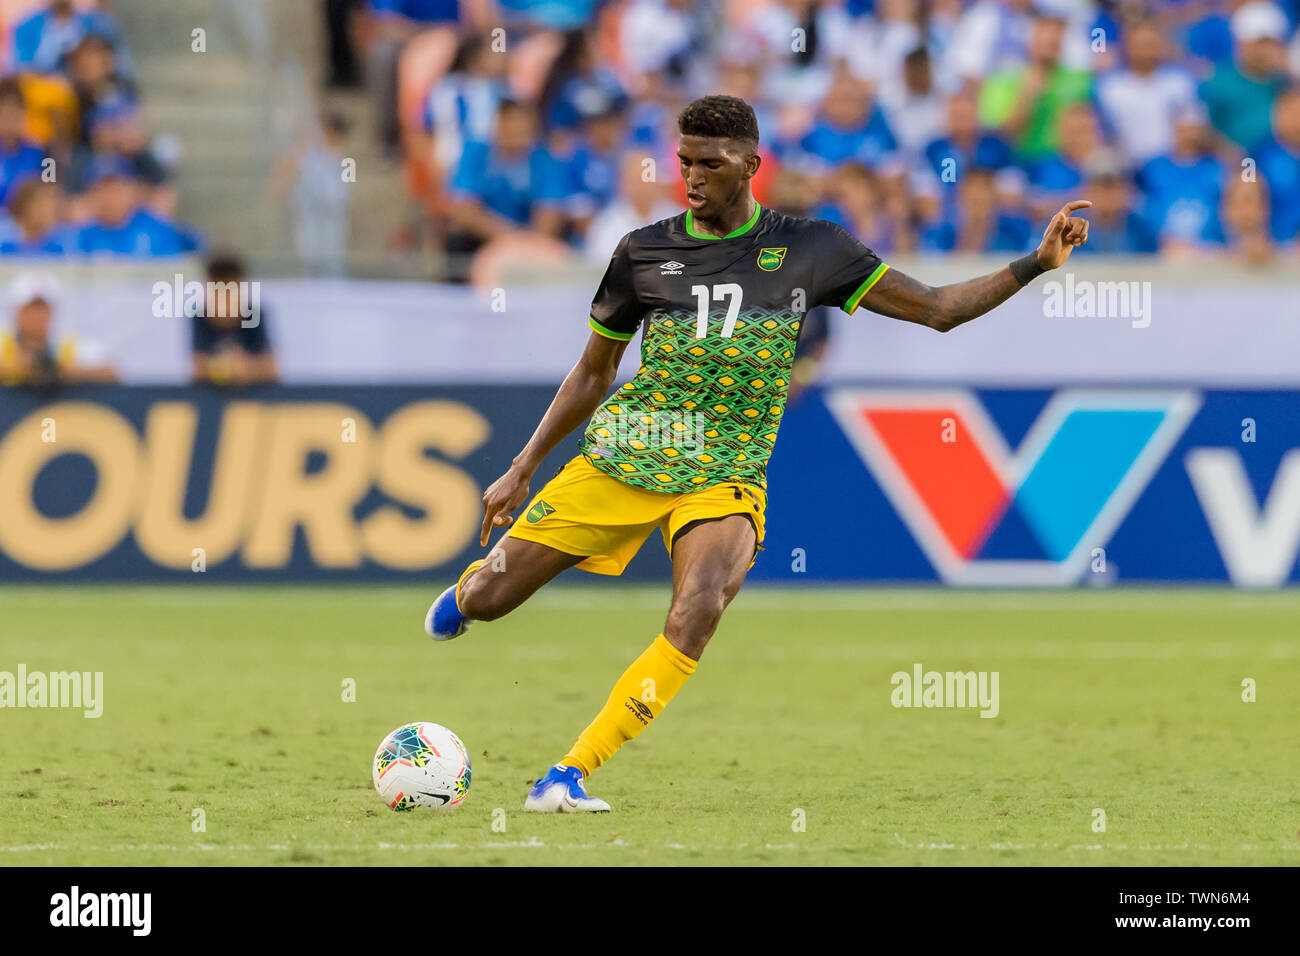 June 21, 2019 : Jamaica defender Damion Lowe (17) during a Concacaf Gold Cup group c match between El Salvador and Jamaica at BBVA Stadium in Houston, Texas. The final ended in a tie 0-0. Maria Lysaker/CSM Stock Photo